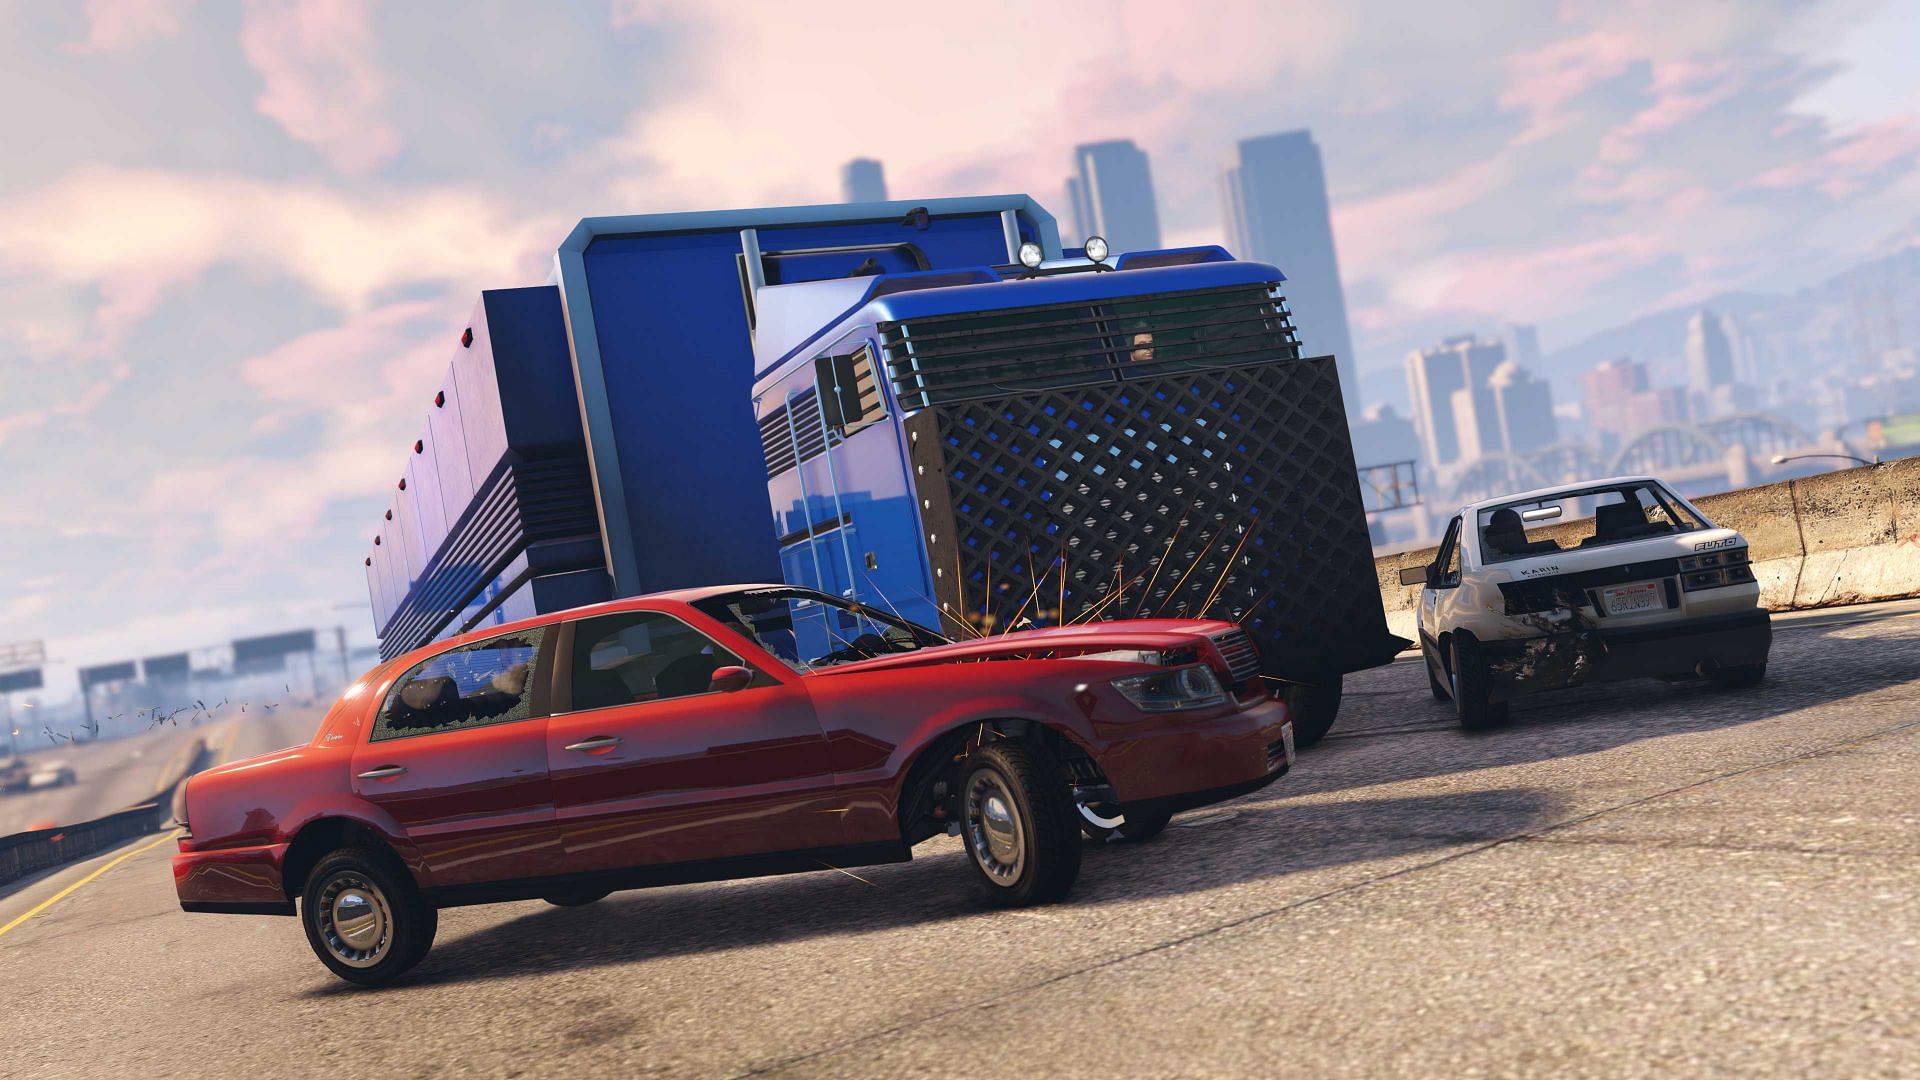 GTA Online players can get good value out of the MOC this week (Image via Rockstar Games)